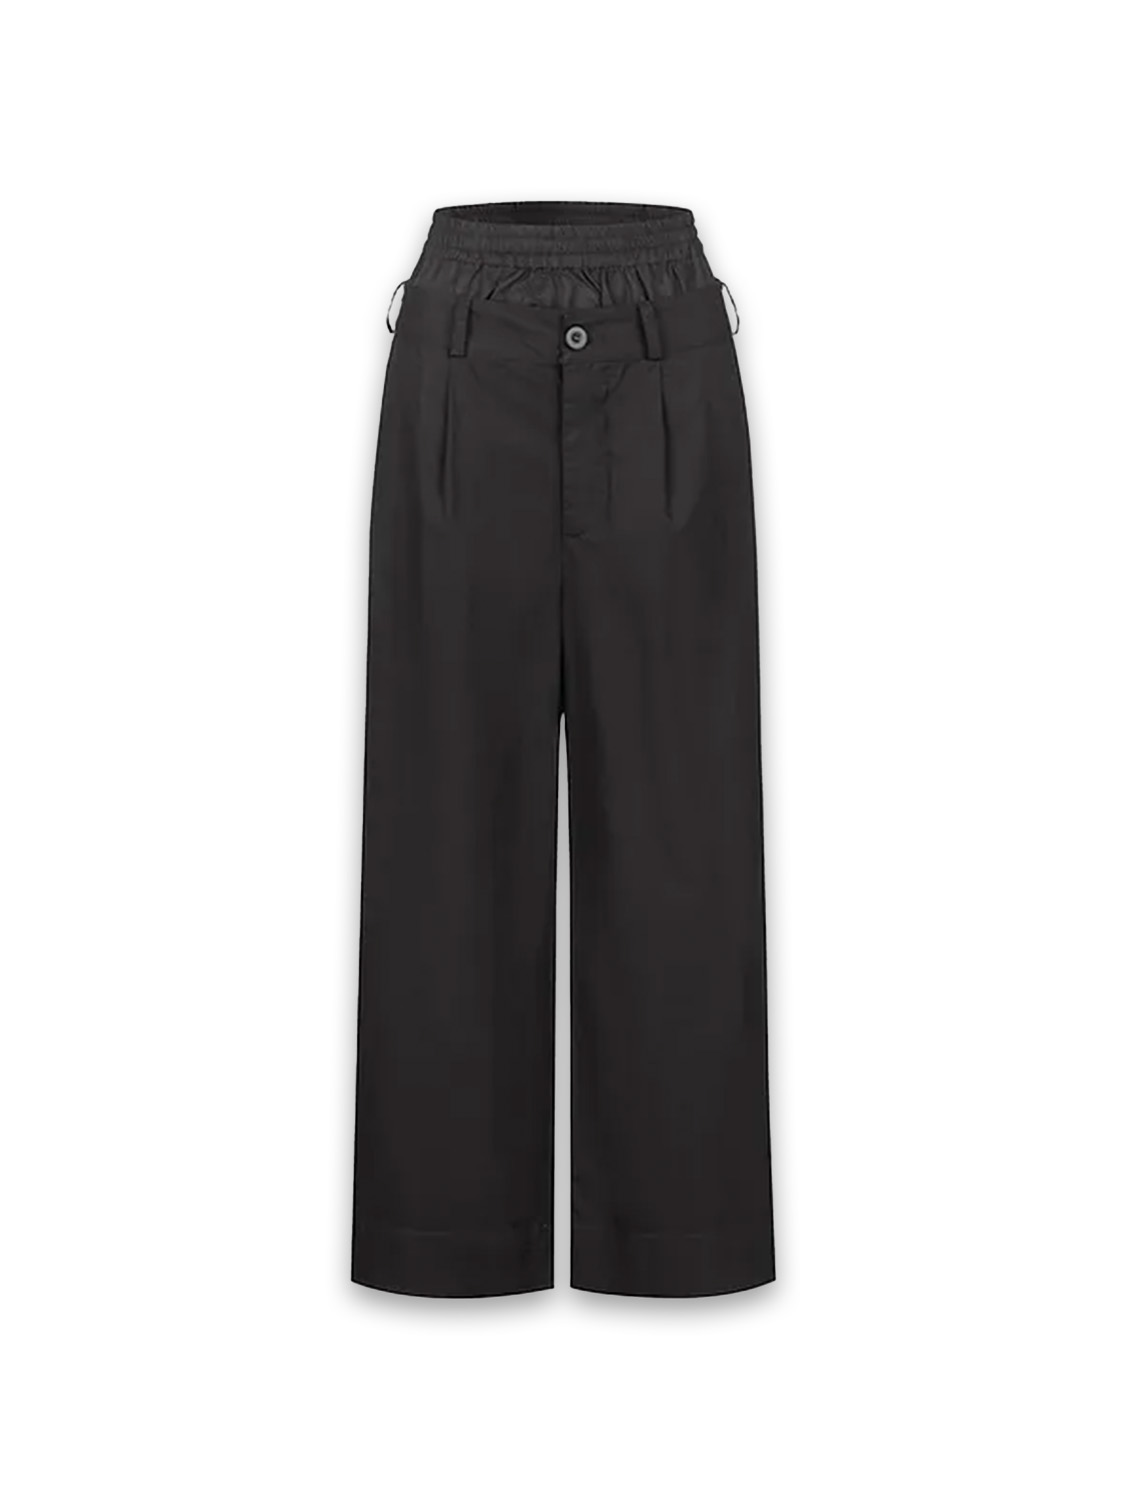 Piper - Double waist pants in soft cotton 